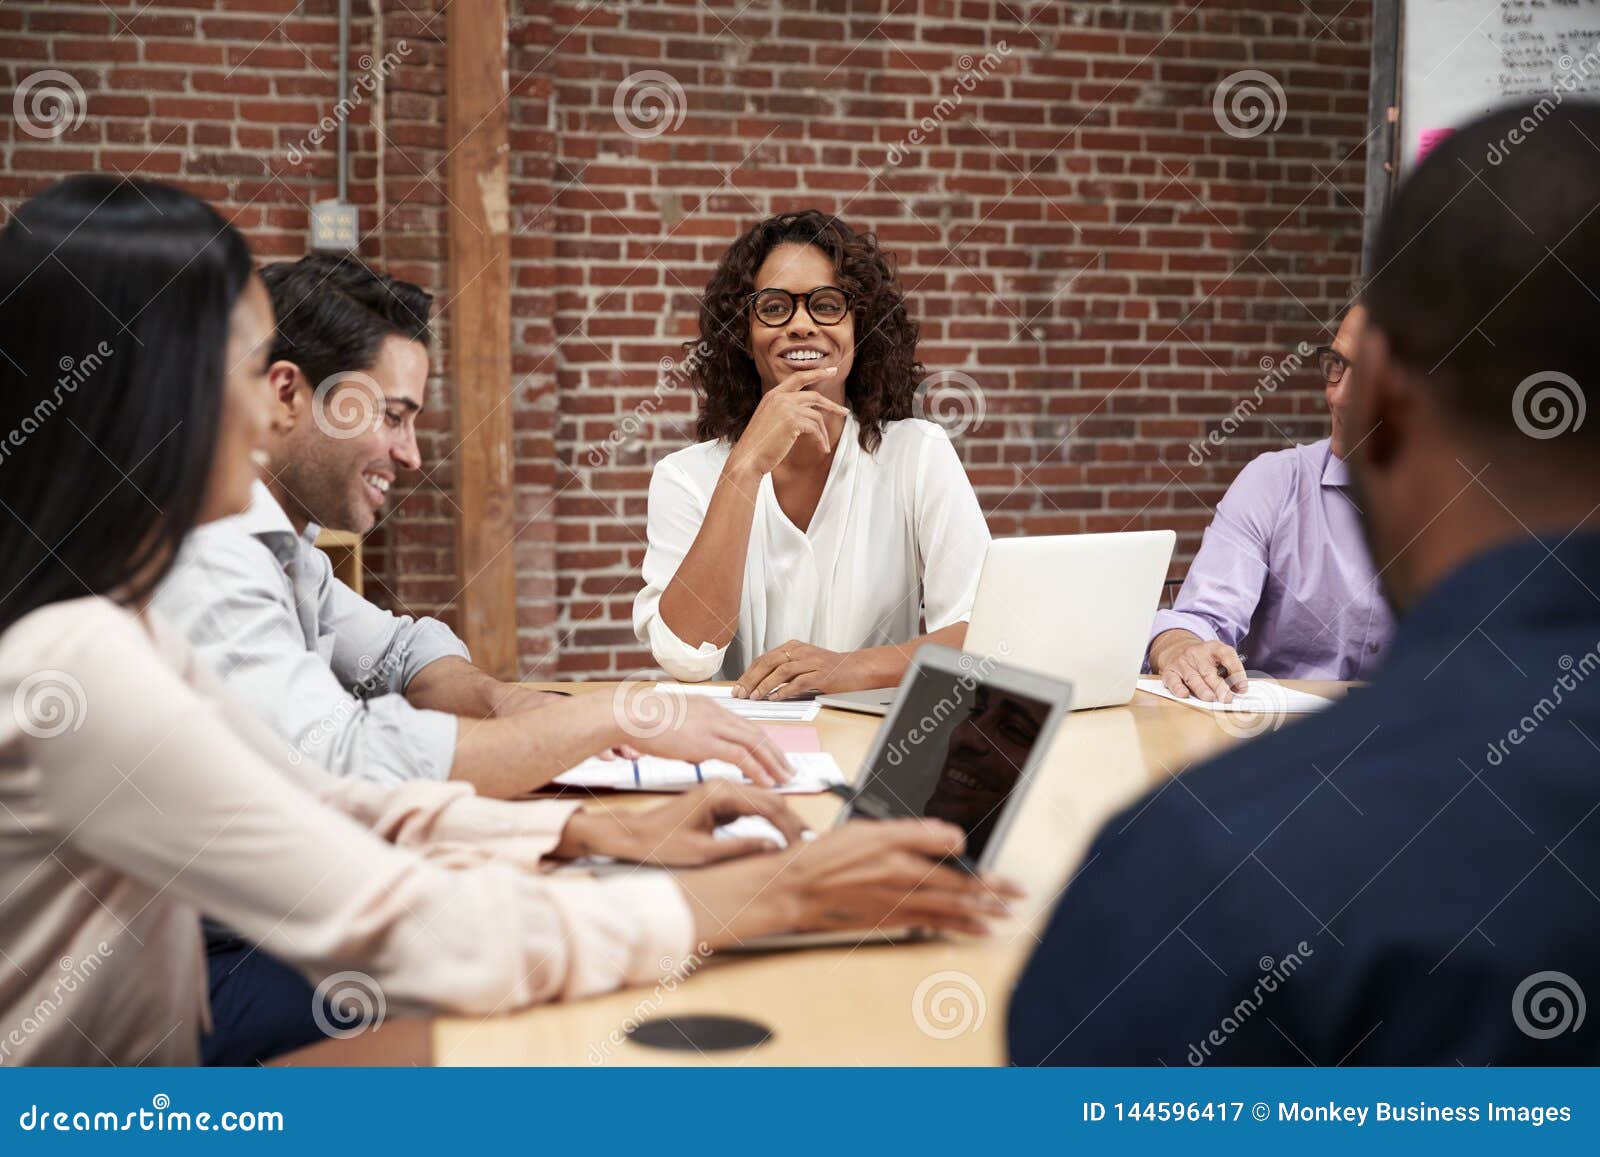 businesswoman leading office meeting of colleagues sitting around table